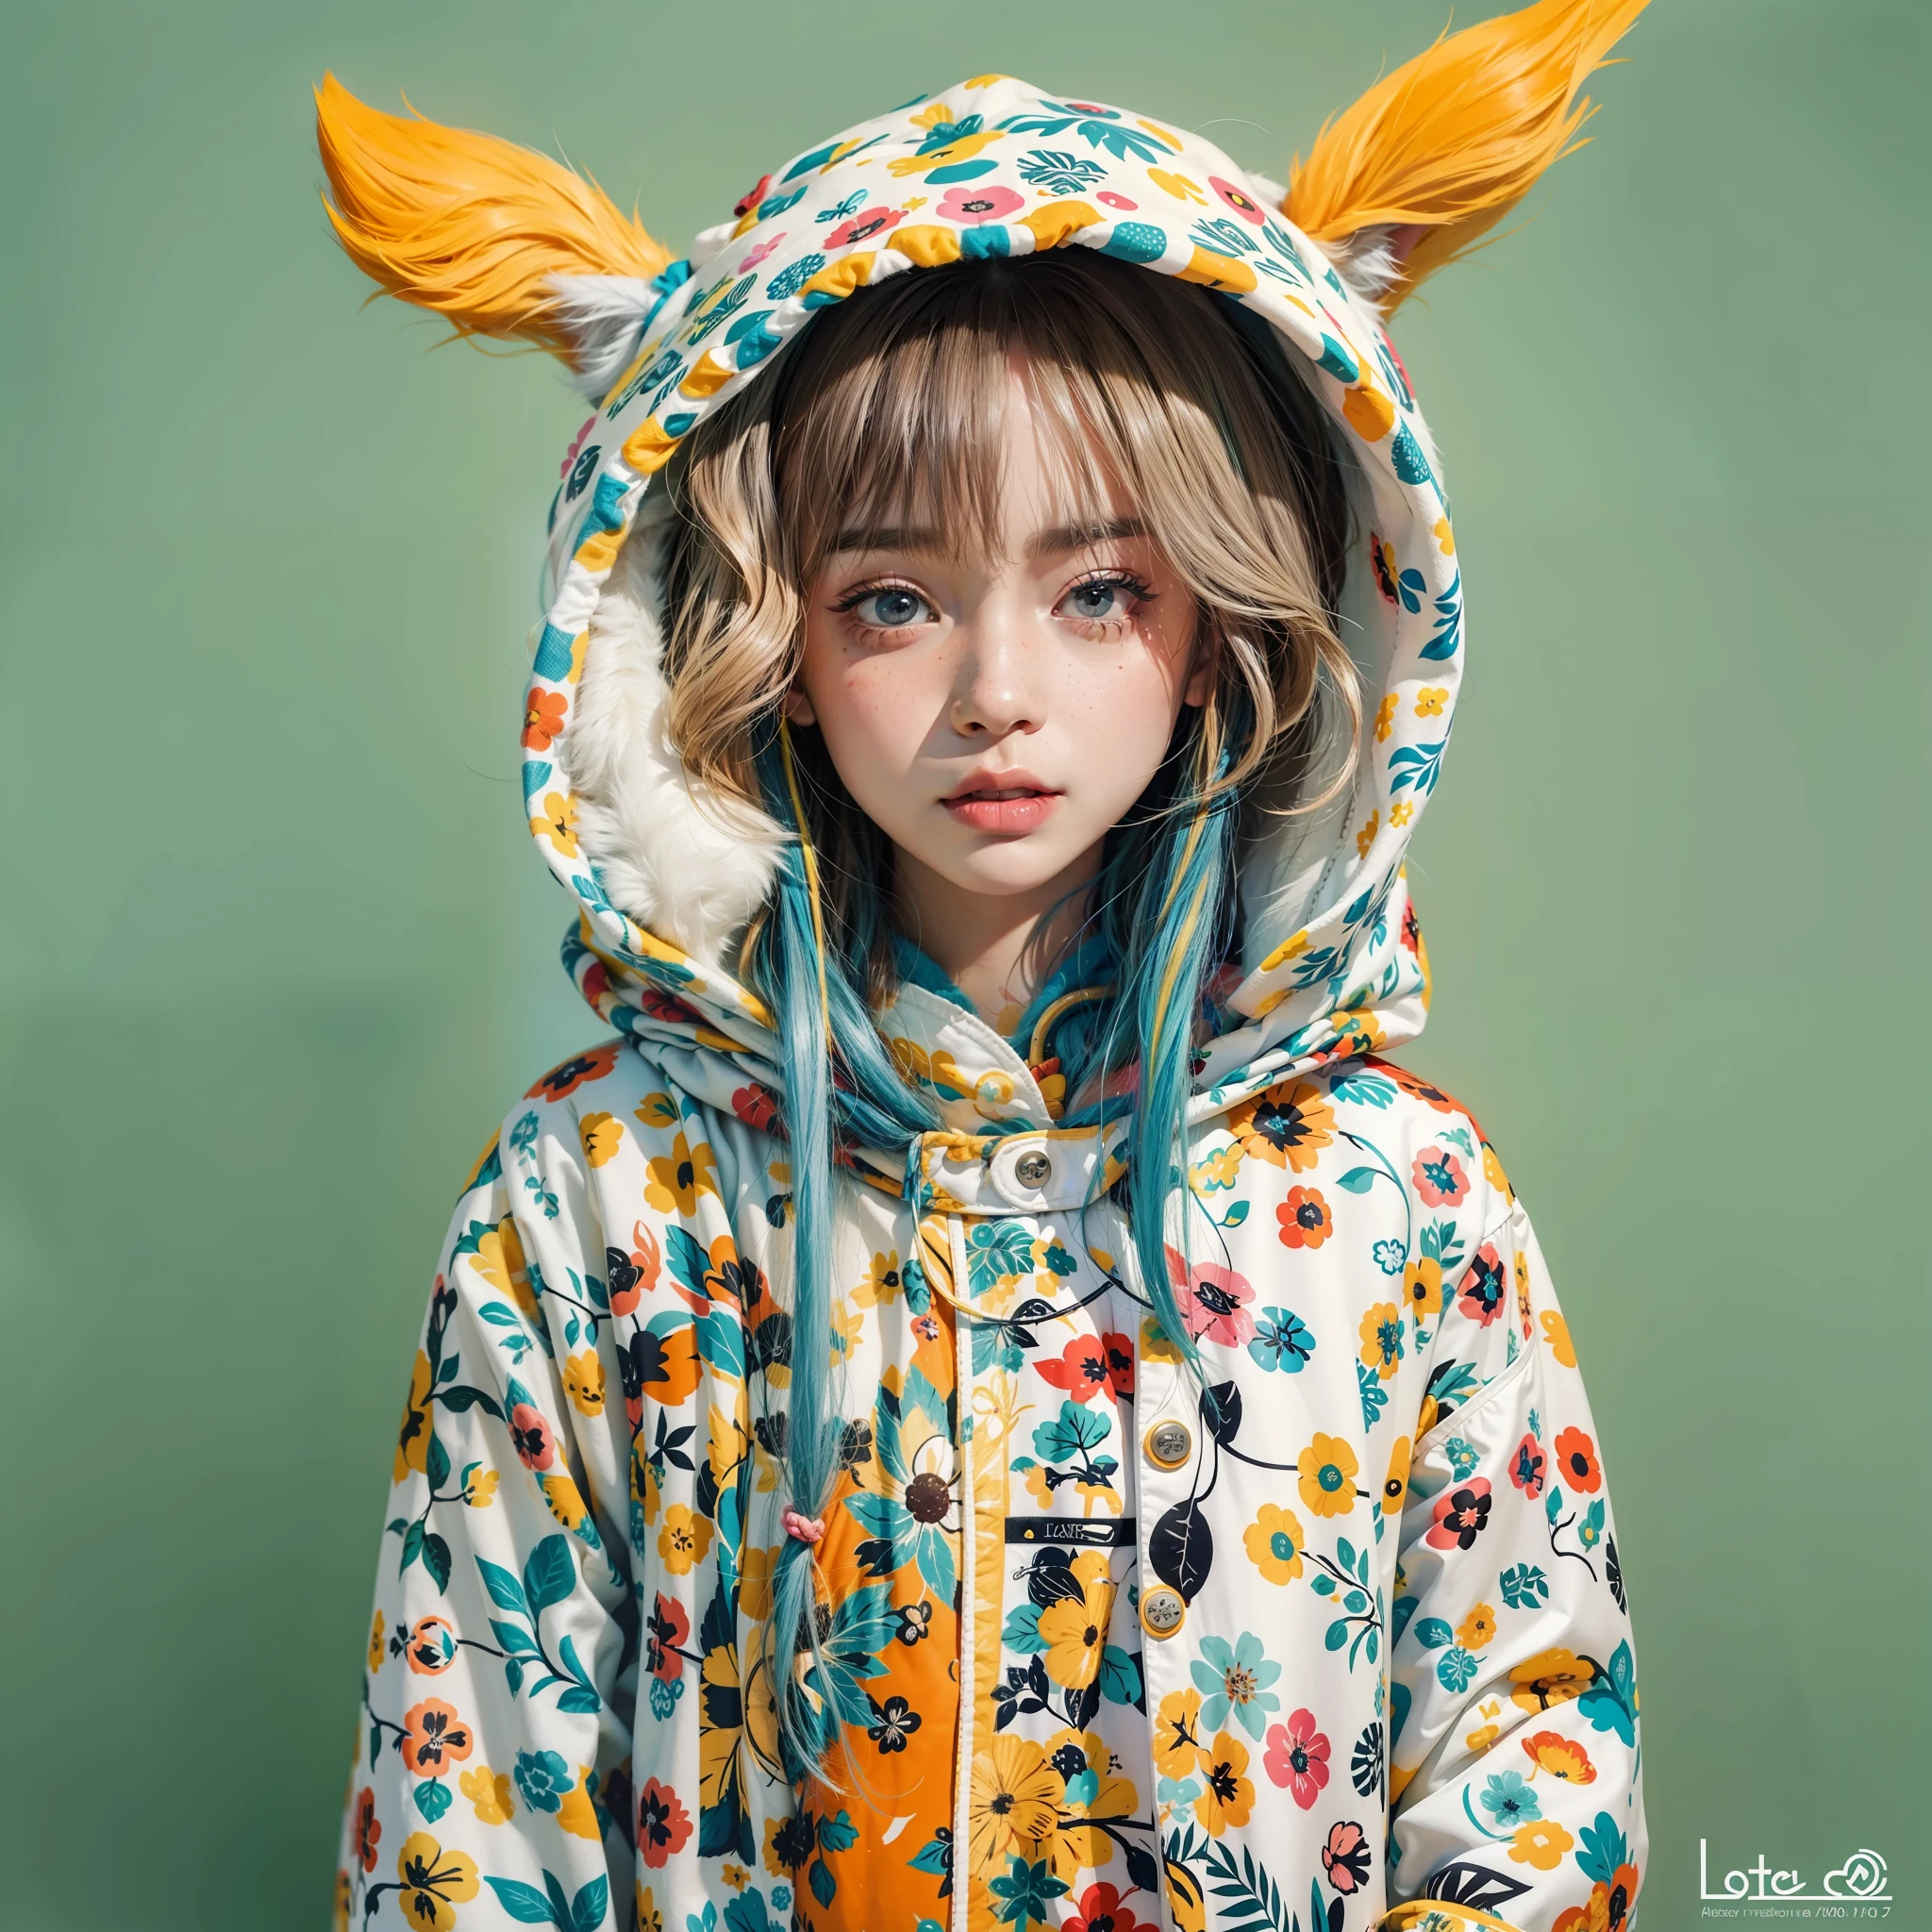 10years old girl、Photo、Fantastical、Pop Color、Loretta Luxe、flat-colors、hitornfreckles、animal hood、Plain background